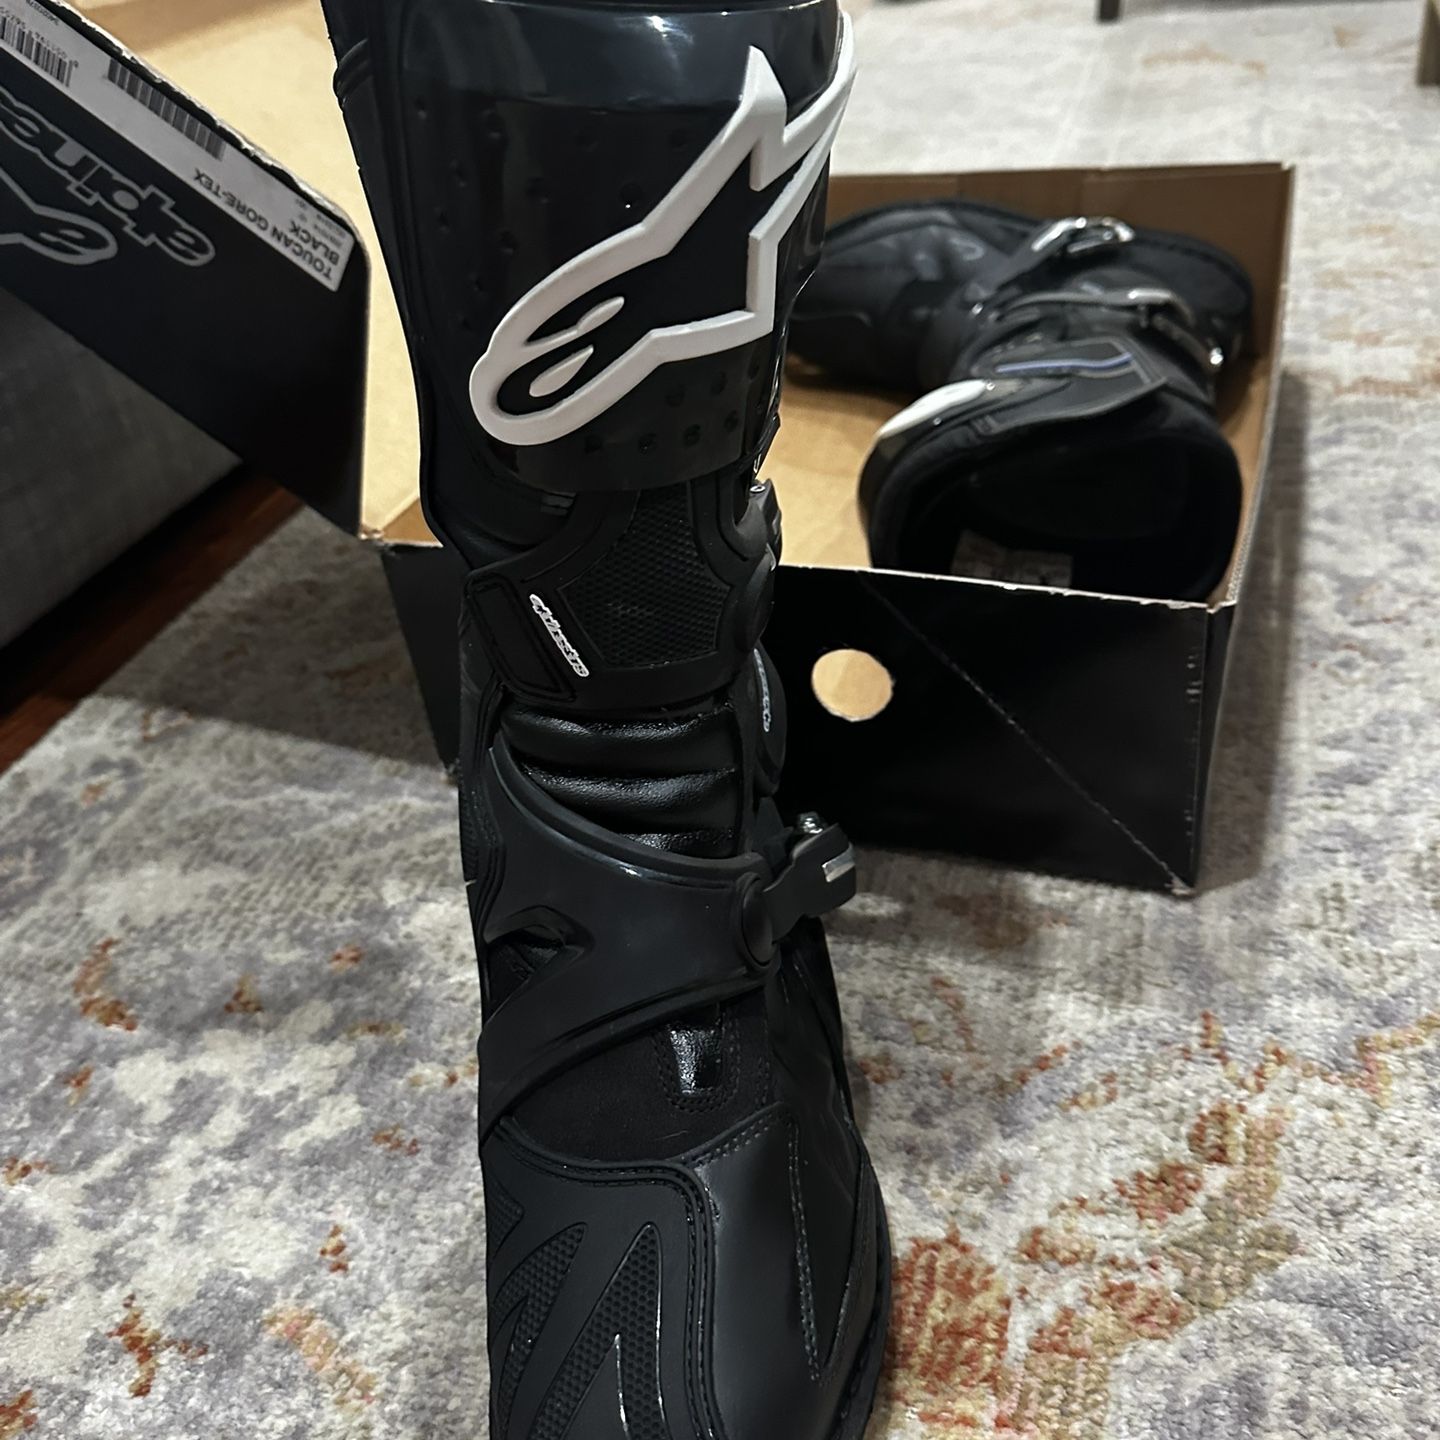 Brand new Alpine Stars Motorcycle Boots Size 10.5